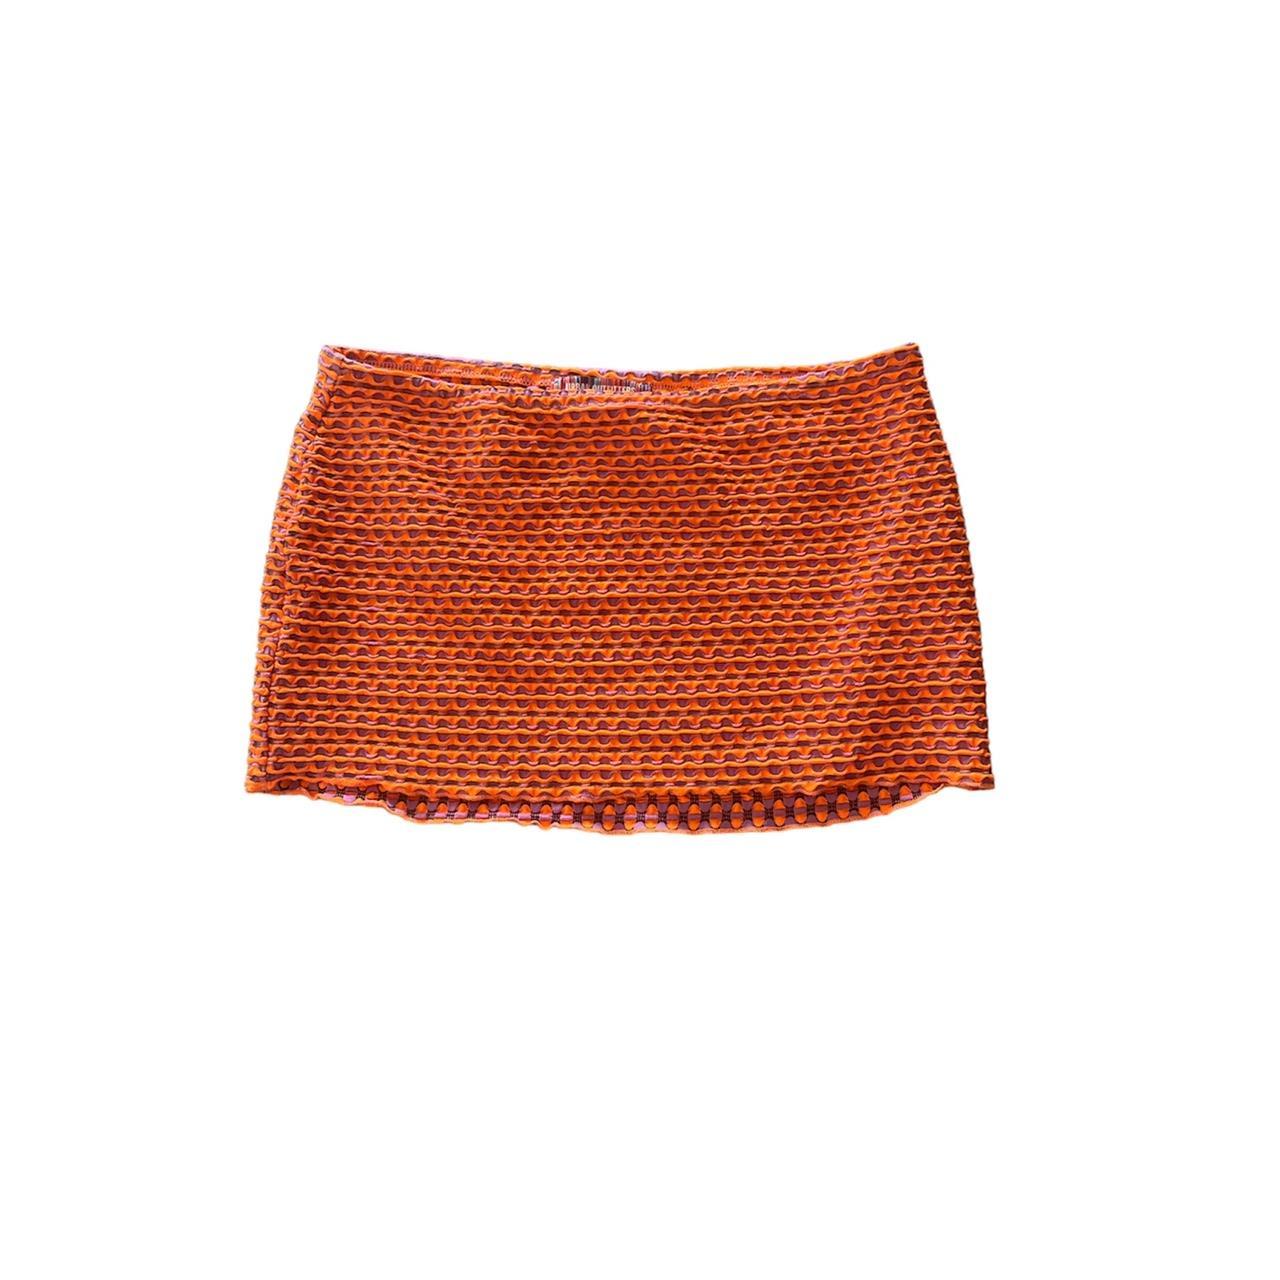 Urban Outfitters Women's Orange and Purple Skirt